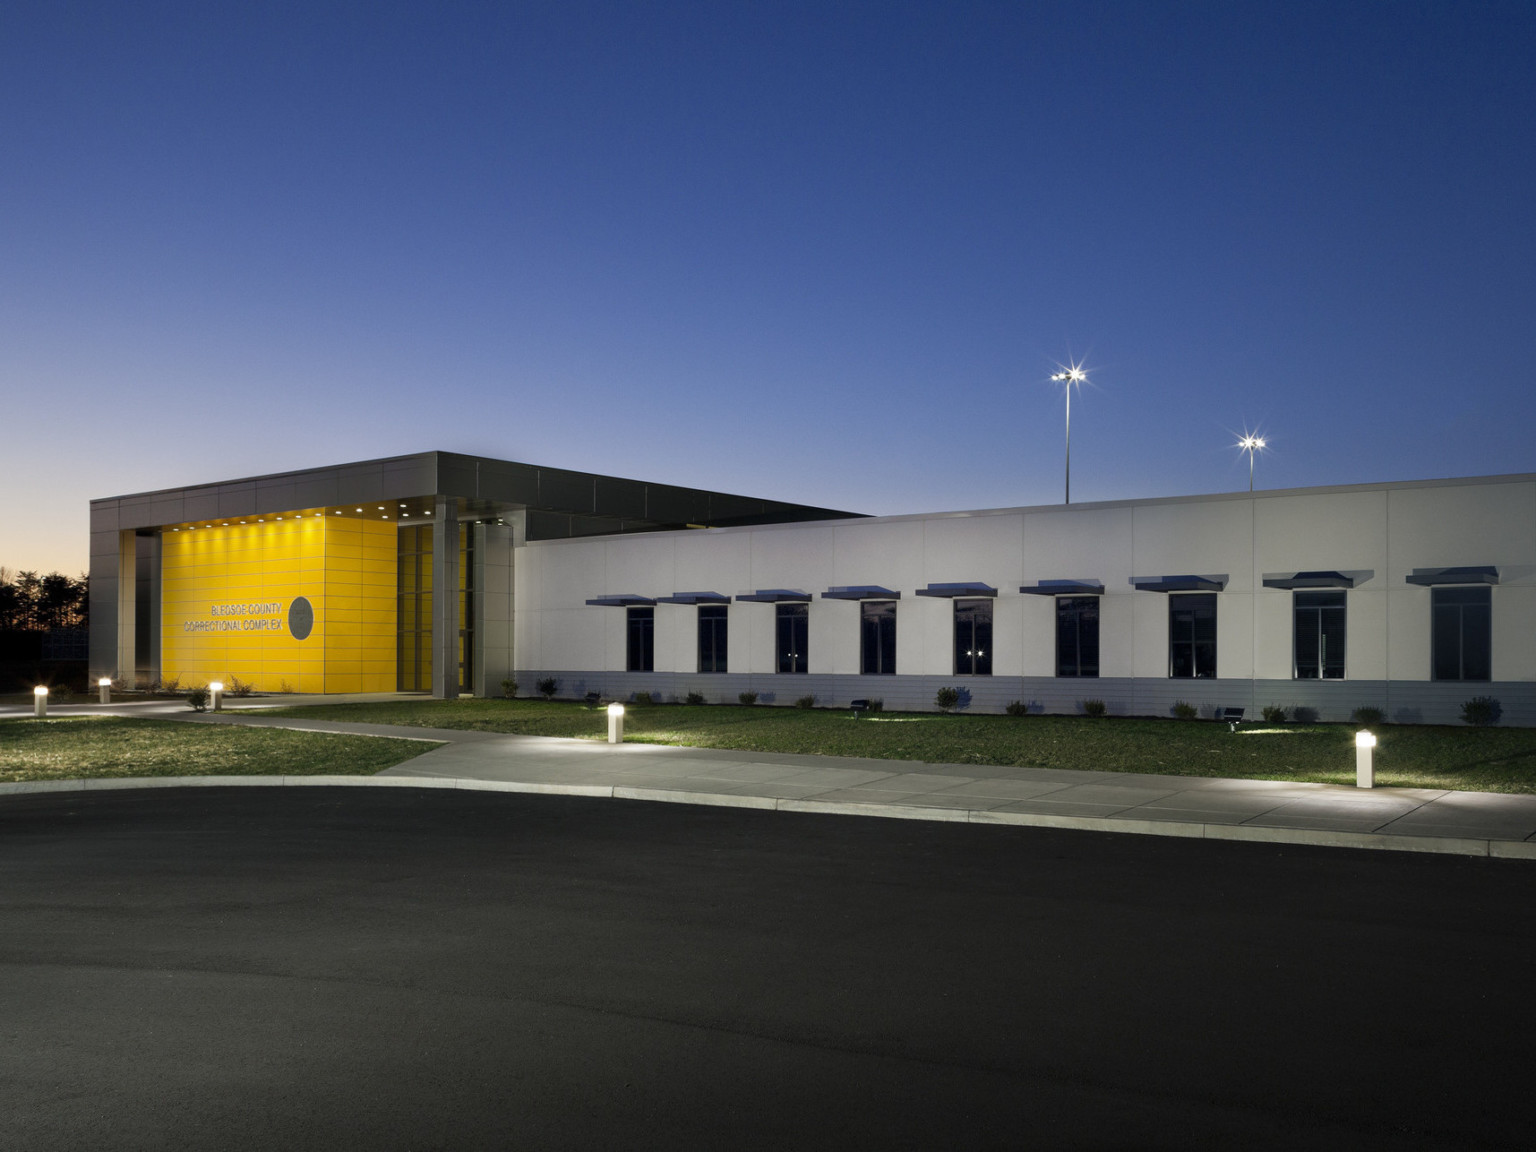 The Bledsoe County Correctional Complex exterior entryway viewed at night. Yellow accent wall is illuminated from above